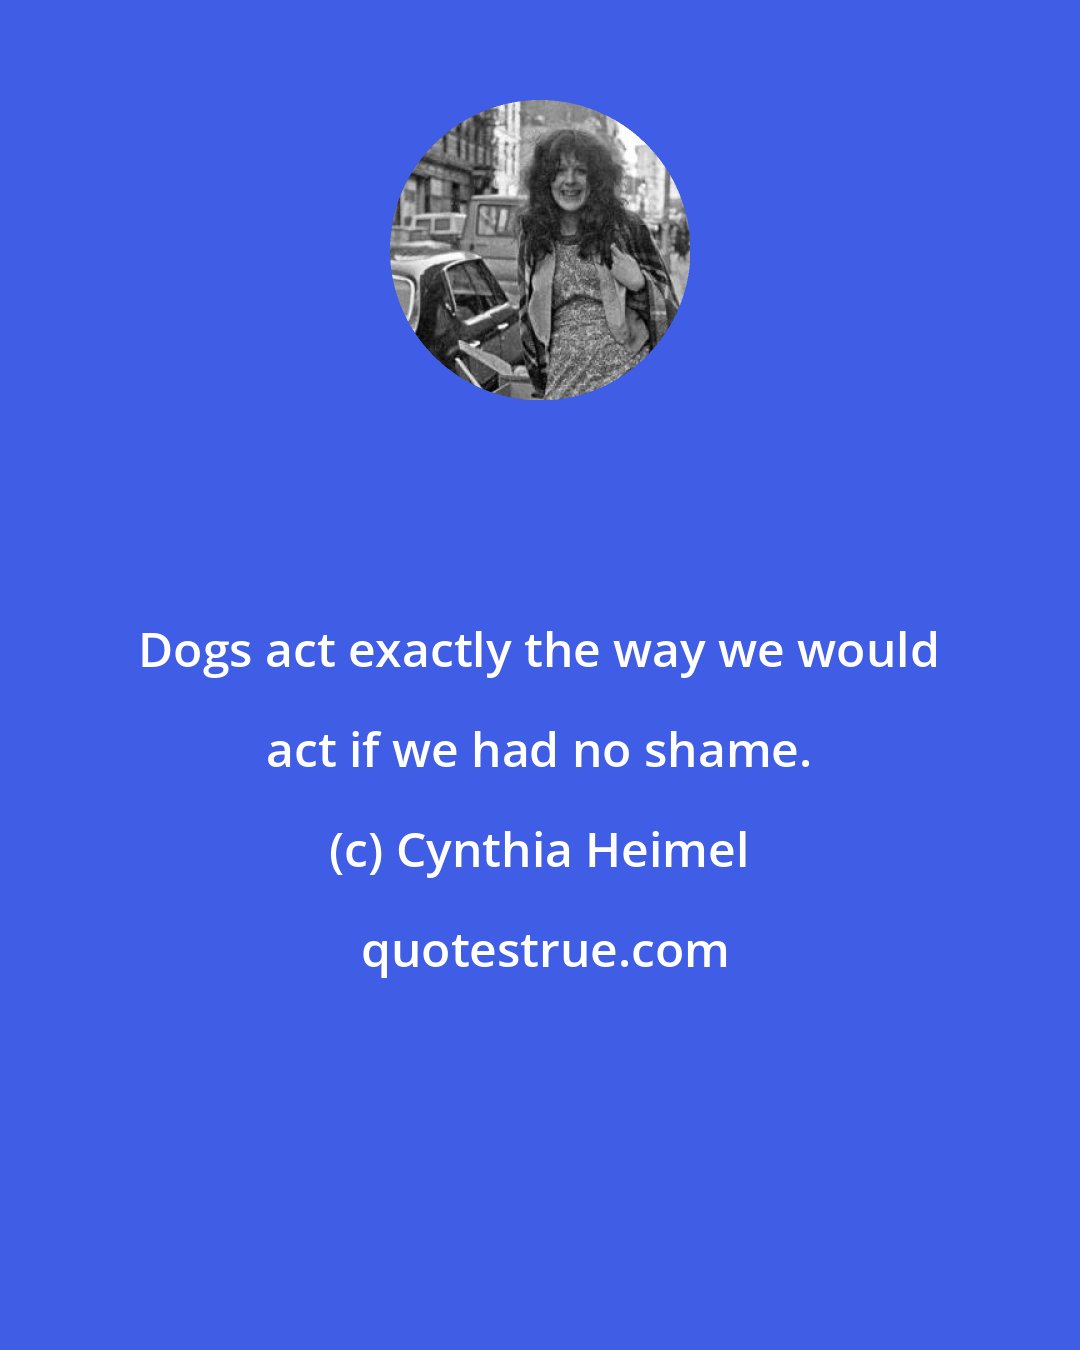 Cynthia Heimel: Dogs act exactly the way we would act if we had no shame.